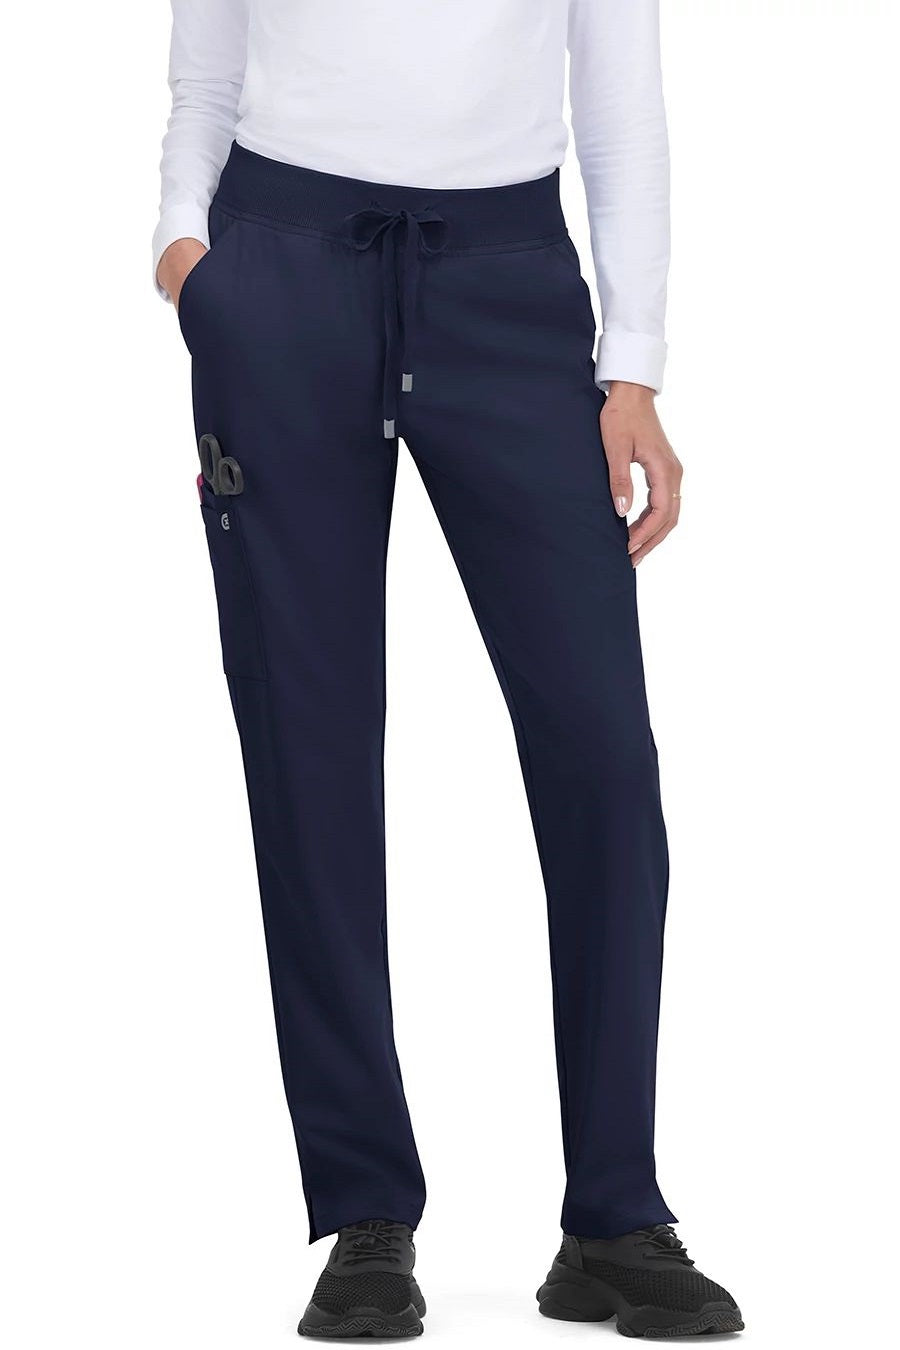 koi Scrub Pants Cureology Atria in Petite Navy at Parker's Clothing and Shoes.